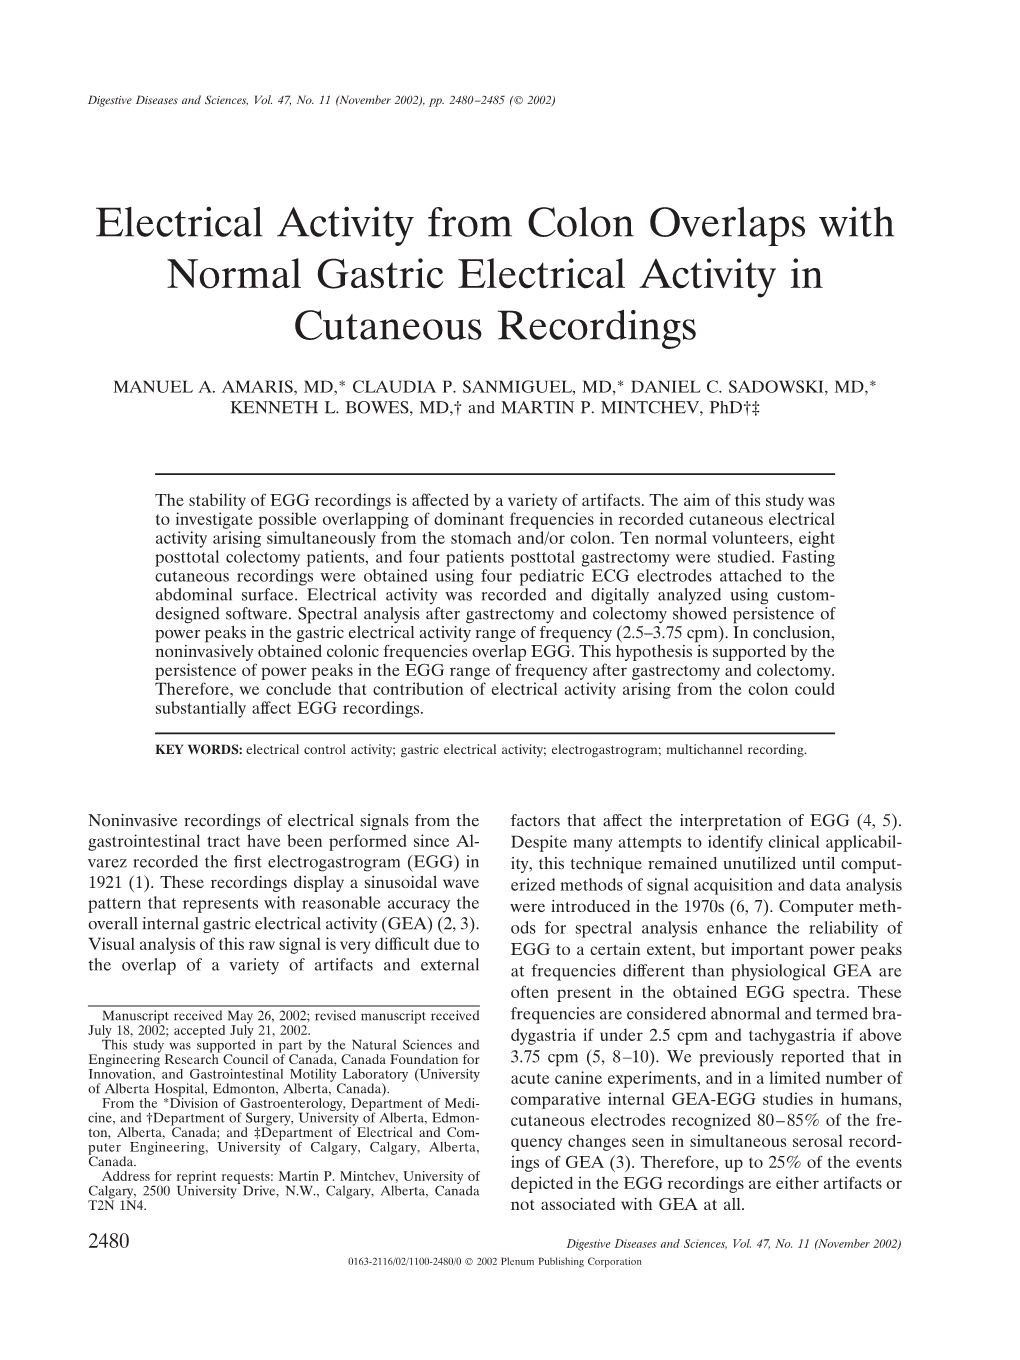 Electrical Activity from Colon Overlaps with Normal Gastric Electrical Activity in Cutaneous Recordings